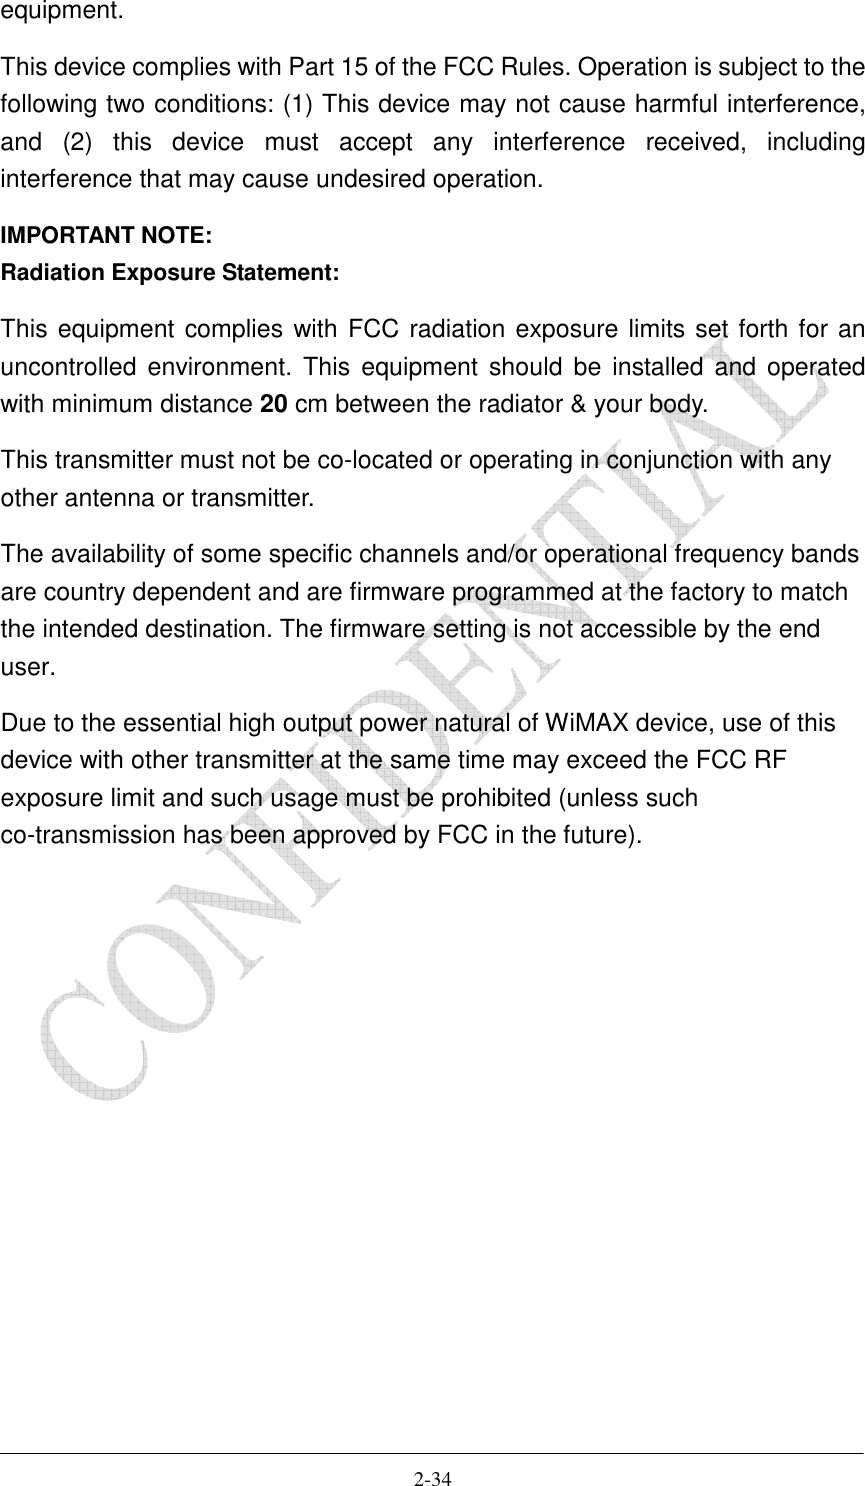    2-34 equipment. This device complies with Part 15 of the FCC Rules. Operation is subject to the following two conditions: (1) This device may not cause harmful interference, and  (2)  this  device  must  accept  any  interference  received,  including interference that may cause undesired operation. IMPORTANT NOTE: Radiation Exposure Statement: This equipment complies with FCC radiation exposure limits set forth for an uncontrolled  environment. This  equipment  should  be  installed  and operated with minimum distance 20 cm between the radiator &amp; your body. This transmitter must not be co-located or operating in conjunction with any other antenna or transmitter. The availability of some specific channels and/or operational frequency bands are country dependent and are firmware programmed at the factory to match the intended destination. The firmware setting is not accessible by the end user. Due to the essential high output power natural of WiMAX device, use of this device with other transmitter at the same time may exceed the FCC RF exposure limit and such usage must be prohibited (unless such co-transmission has been approved by FCC in the future).   